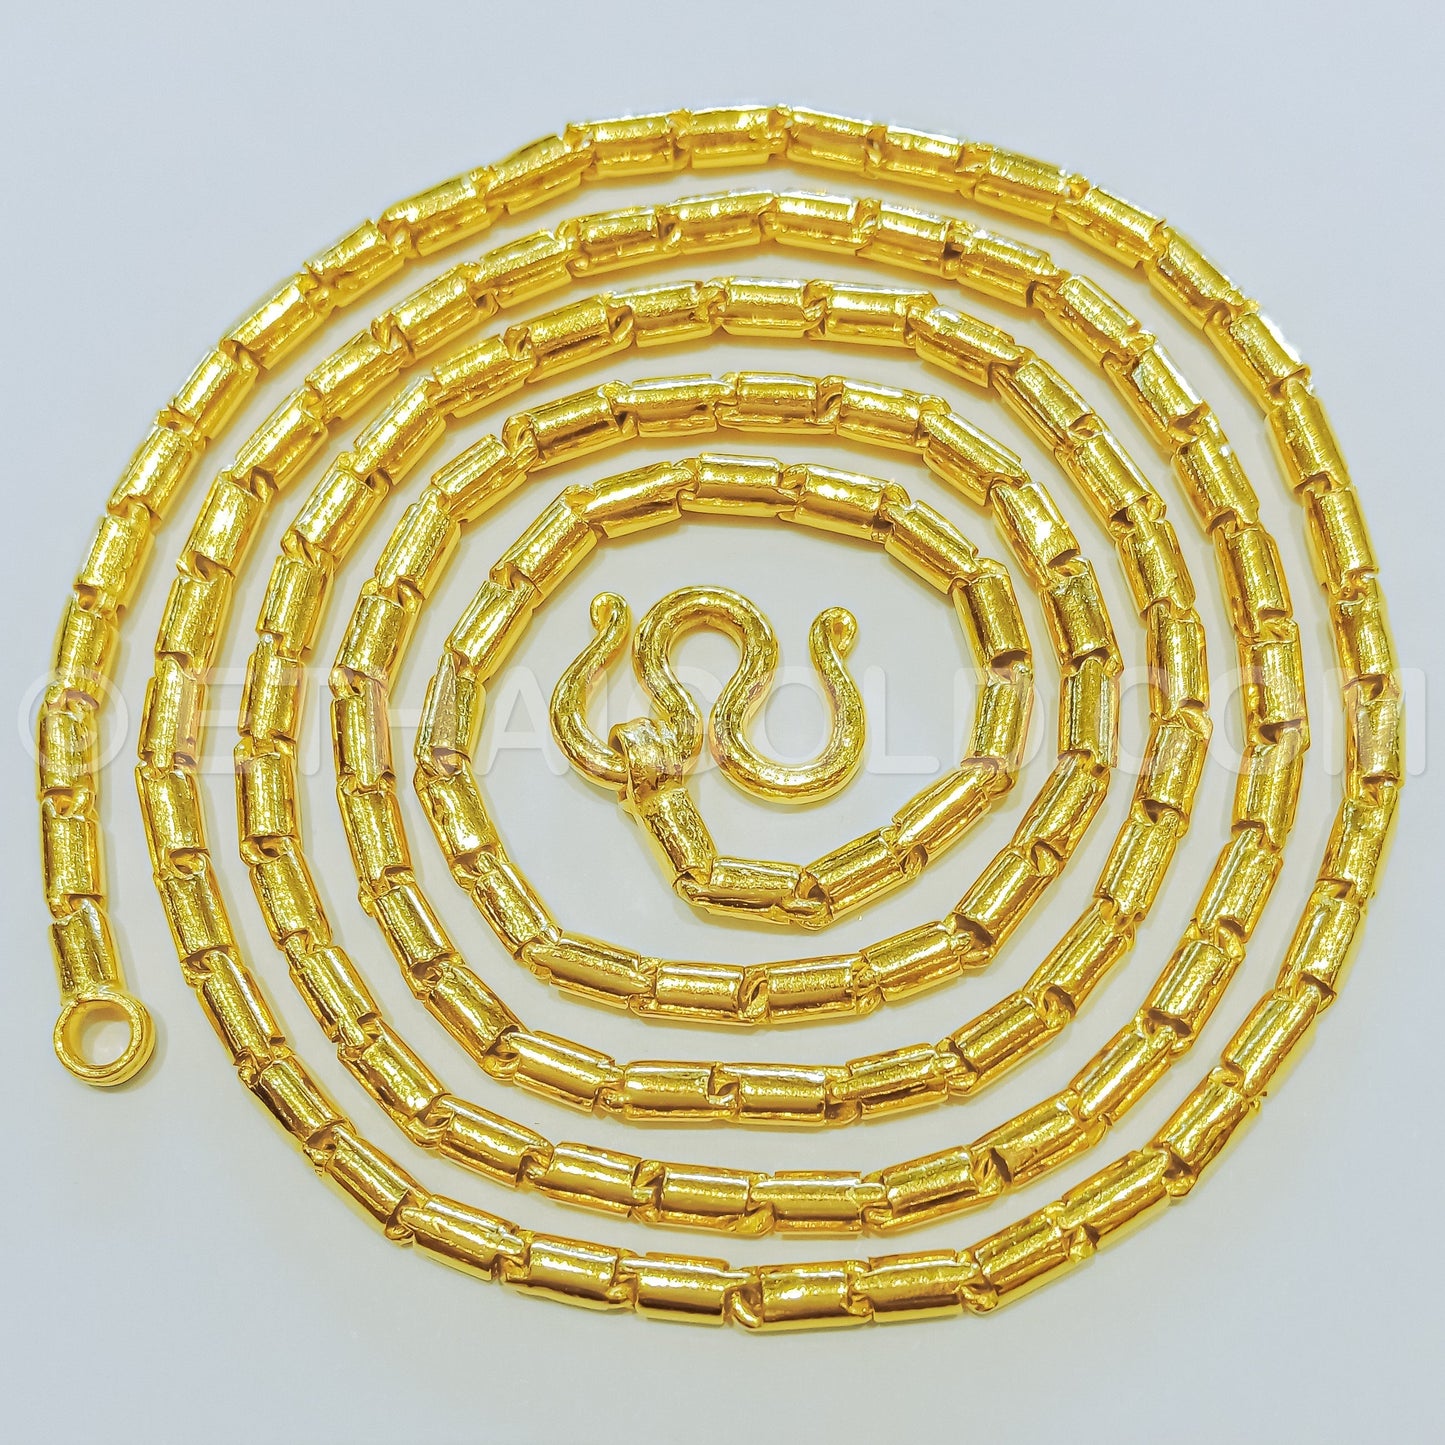 4 BAHT POLISHED SOLID SHORT ROUND BARREL CHAIN NECKLACE IN 23K GOLD (ID: N3104B)